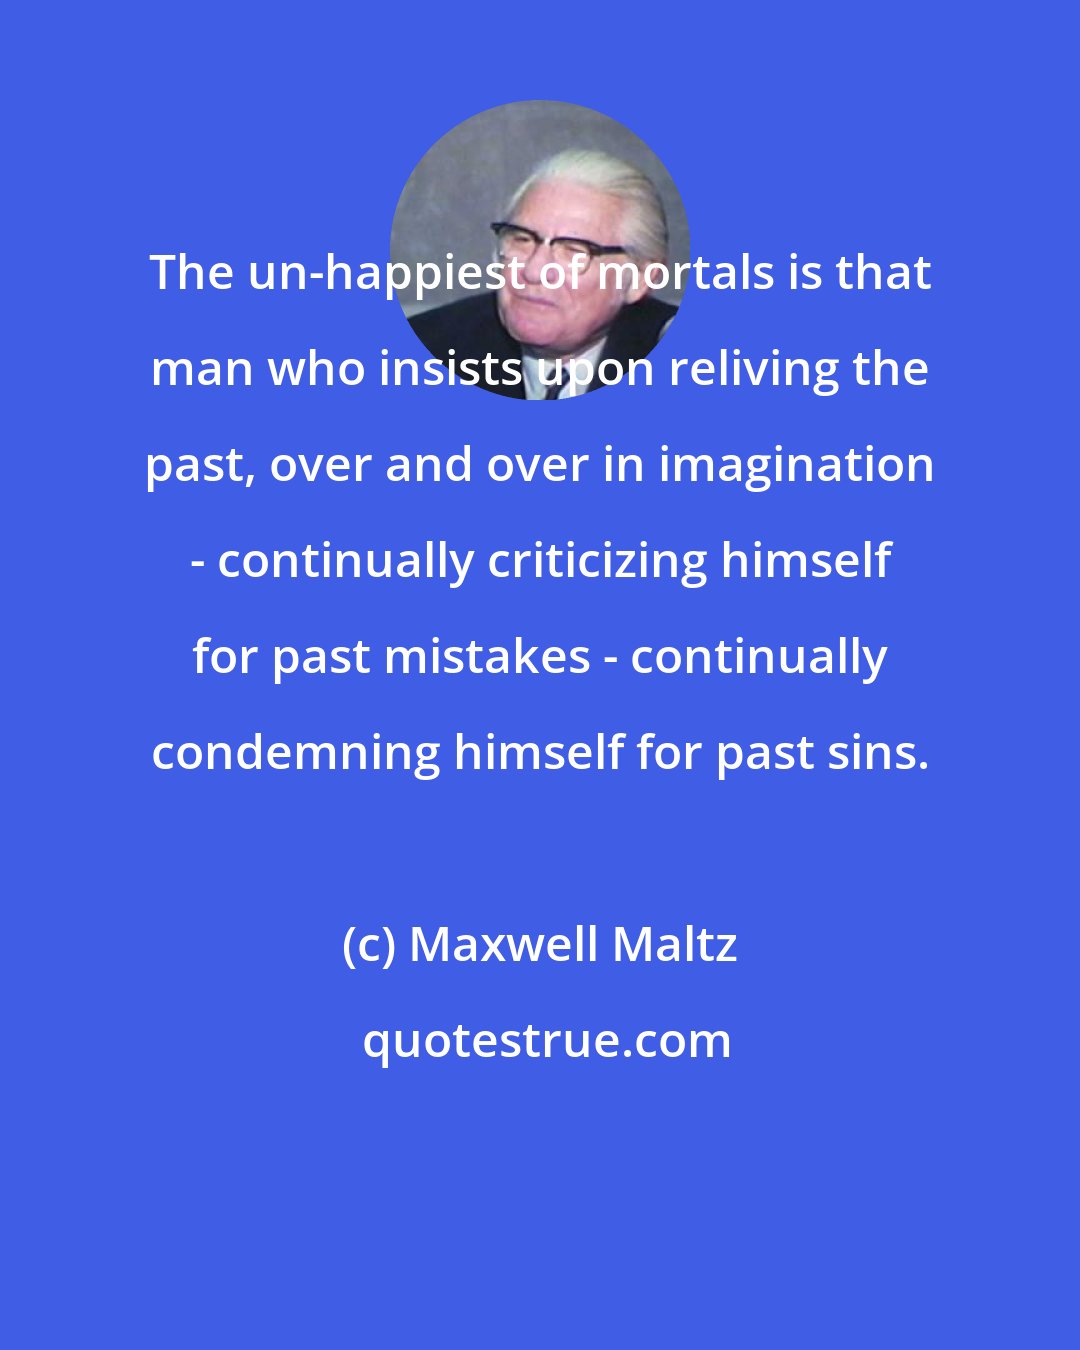 Maxwell Maltz: The un-happiest of mortals is that man who insists upon reliving the past, over and over in imagination - continually criticizing himself for past mistakes - continually condemning himself for past sins.